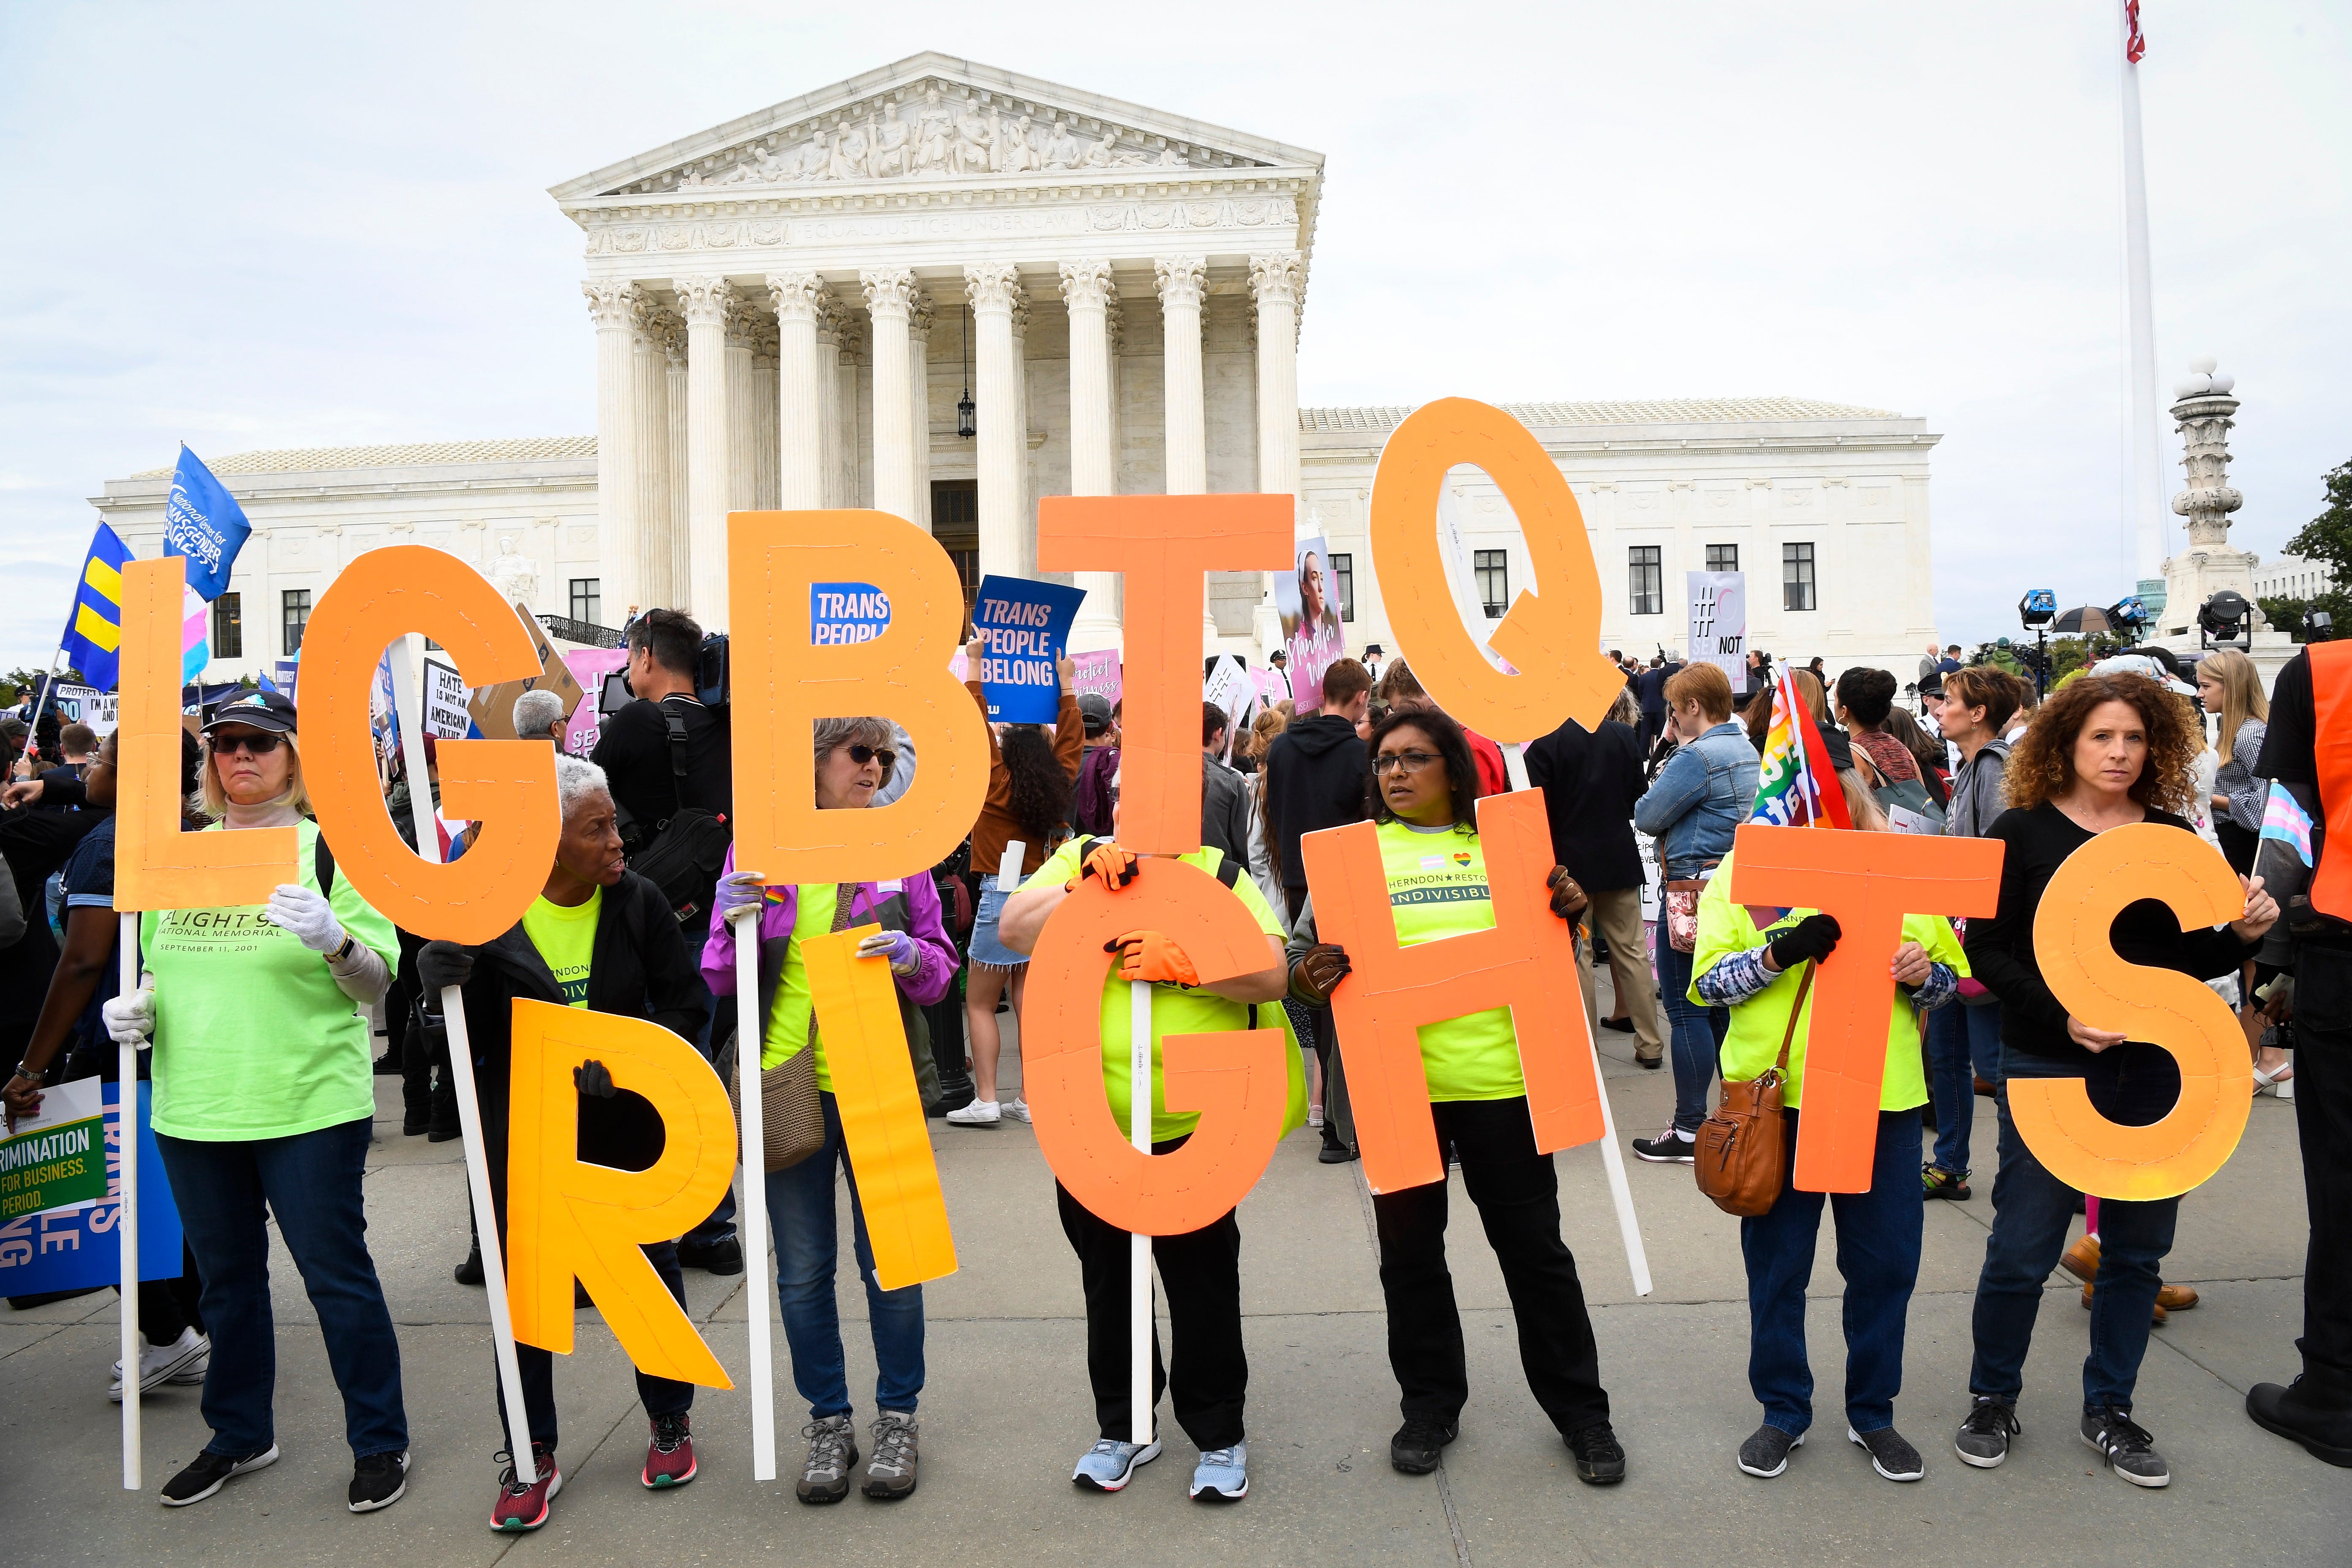 10/8/19 12:40:11 PM --   -- Protestors and supporters gather in front of the U.S. Supreme Court on Oct. 8, 2019 in Washington as the justices hear three challenges from New York, Michigan and Georgia involving workers who claim they were fired because they were gay or transgender. --    Photo by Jack Gruber, USA TODAY Staff ORG XMIT:  JG 138297 SCOTUS_LGBTQ 10/8/201 [Via MerlinFTP Drop]